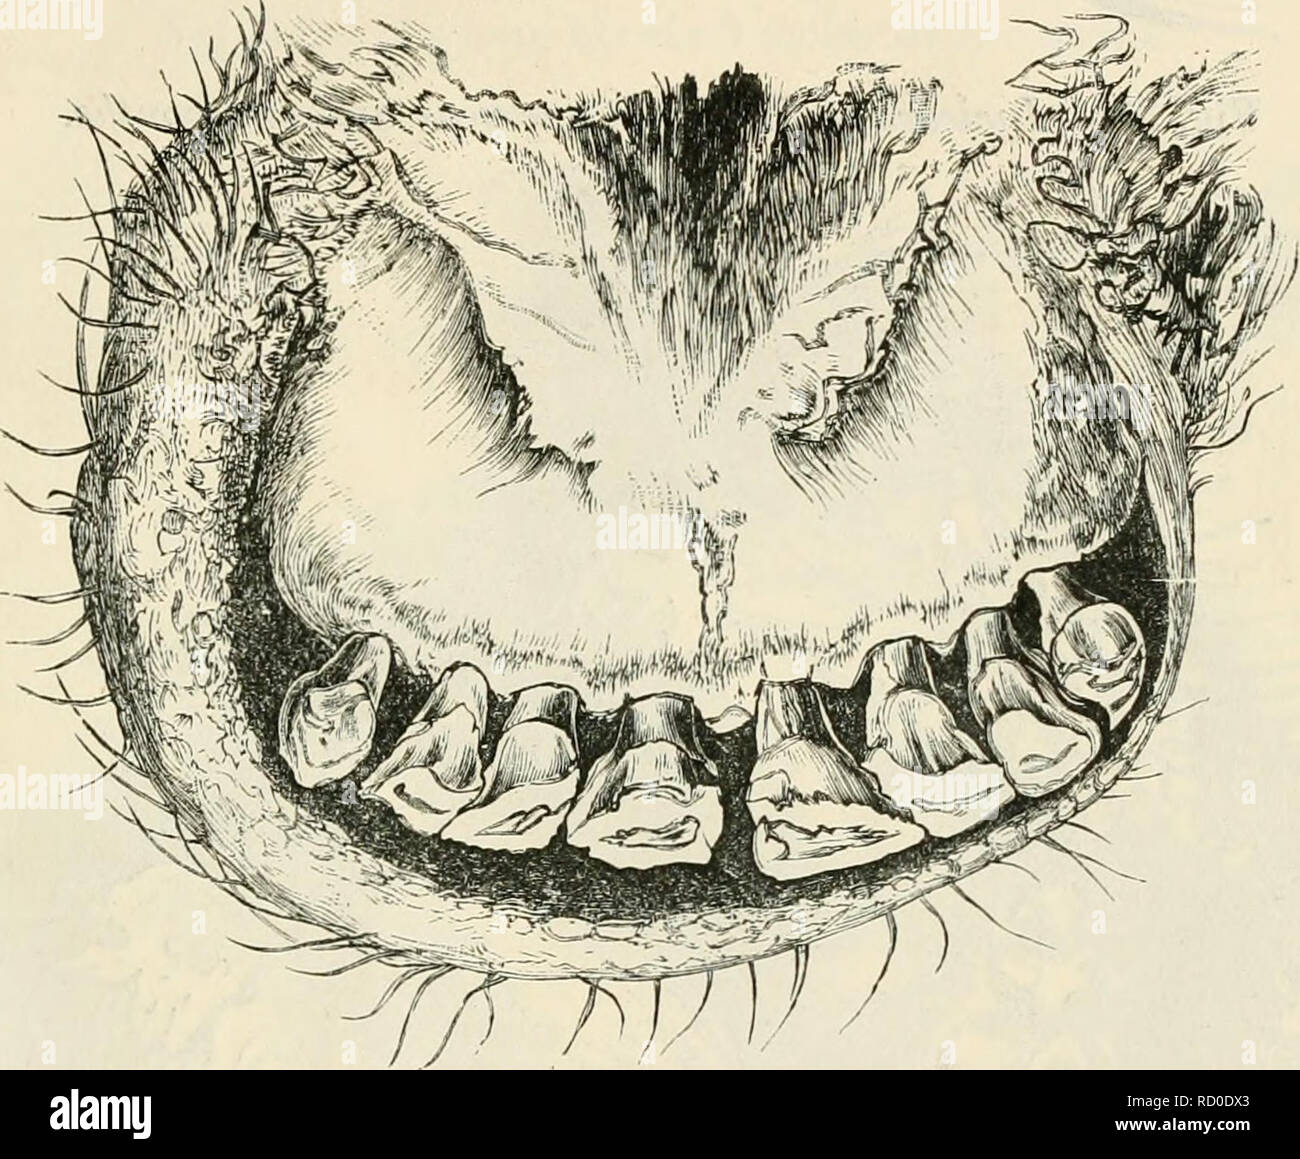 . Dentition as indicative of the age of the animals of the farm. Domestic animals -- Age; Teeth. of the Animals of the Fmm. 37 the observation of the state of the dentition between the ages of one and six months, when the fourth molar is cut; but during this period the jaws expand, the incisor teeth gradually become less crowded, and the space between the third molar and the angle of the jaw increases as the fourth molar, which is the first per- manent tooth, advances to occupy its place, as shown in Fig. 30. At the age o^ sic months the fourth molar is well developed, but it is in close conta Stock Photo